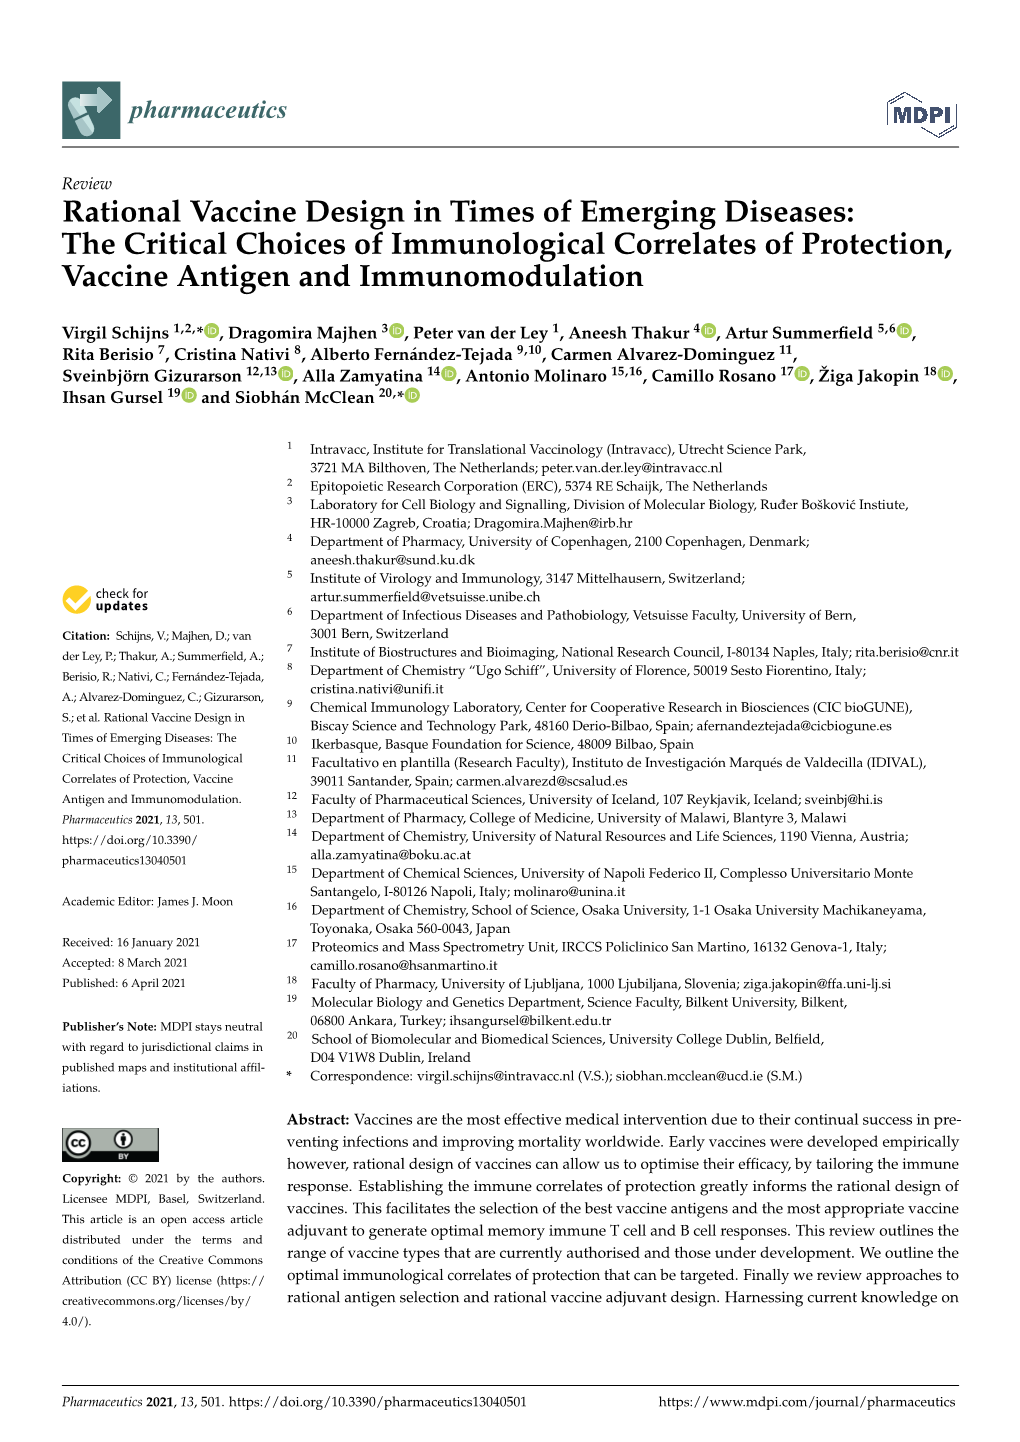 Rational Vaccine Design in Times of Emerging Diseases: the Critical Choices of Immunological Correlates of Protection, Vaccine Antigen and Immunomodulation